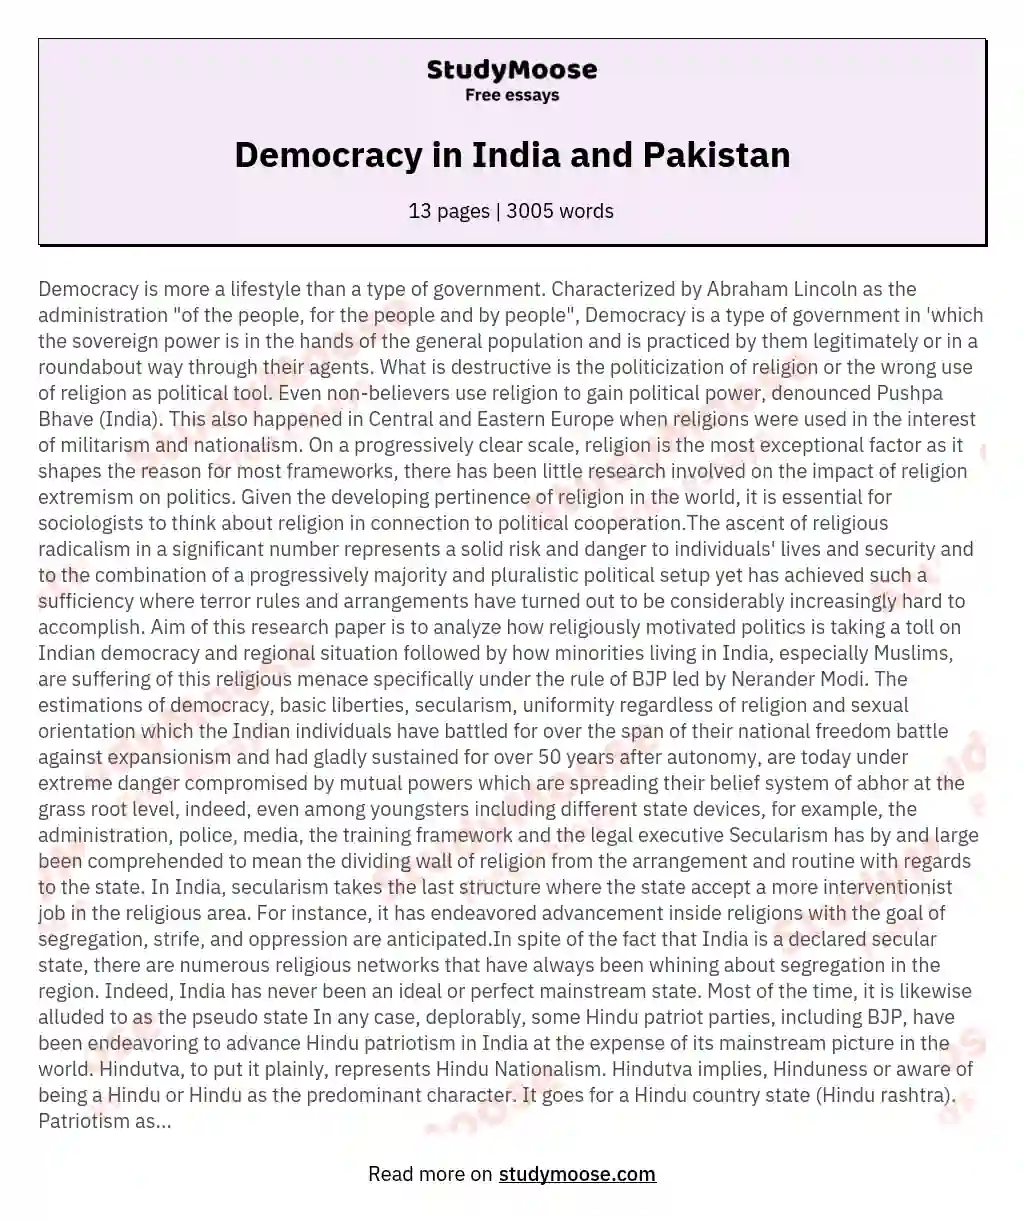 Democracy in India and Pakistan